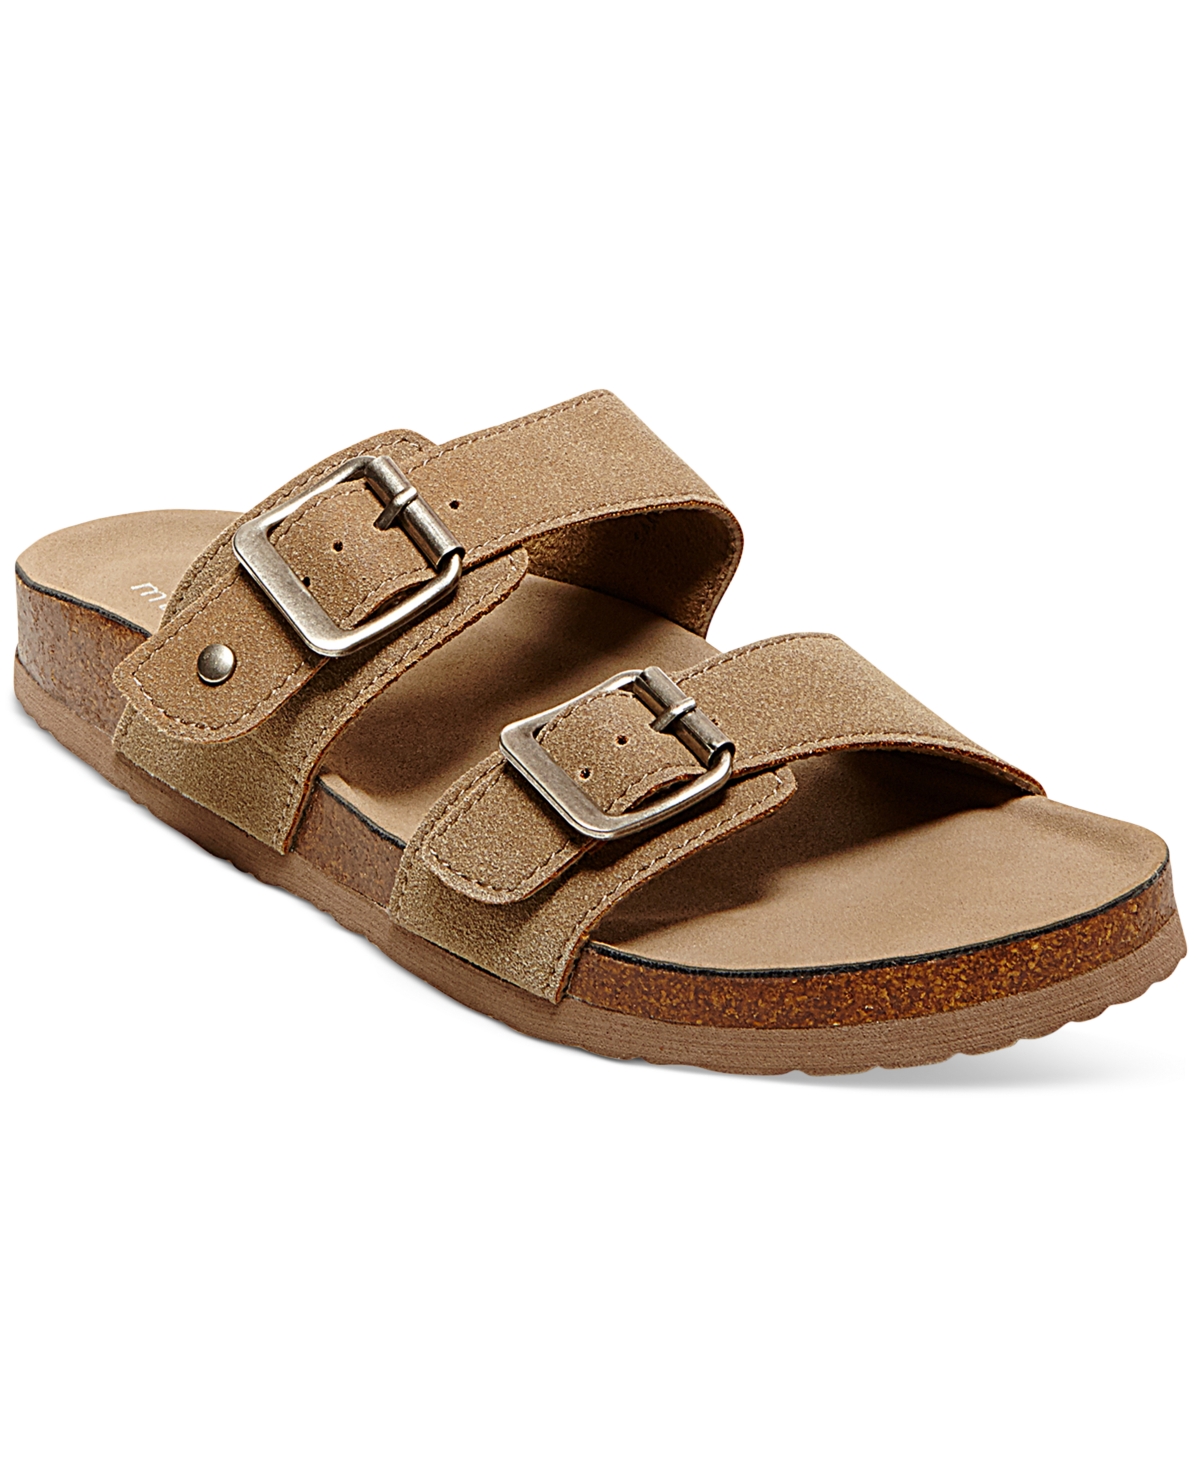 Brando Footbed Sandals - Taupe